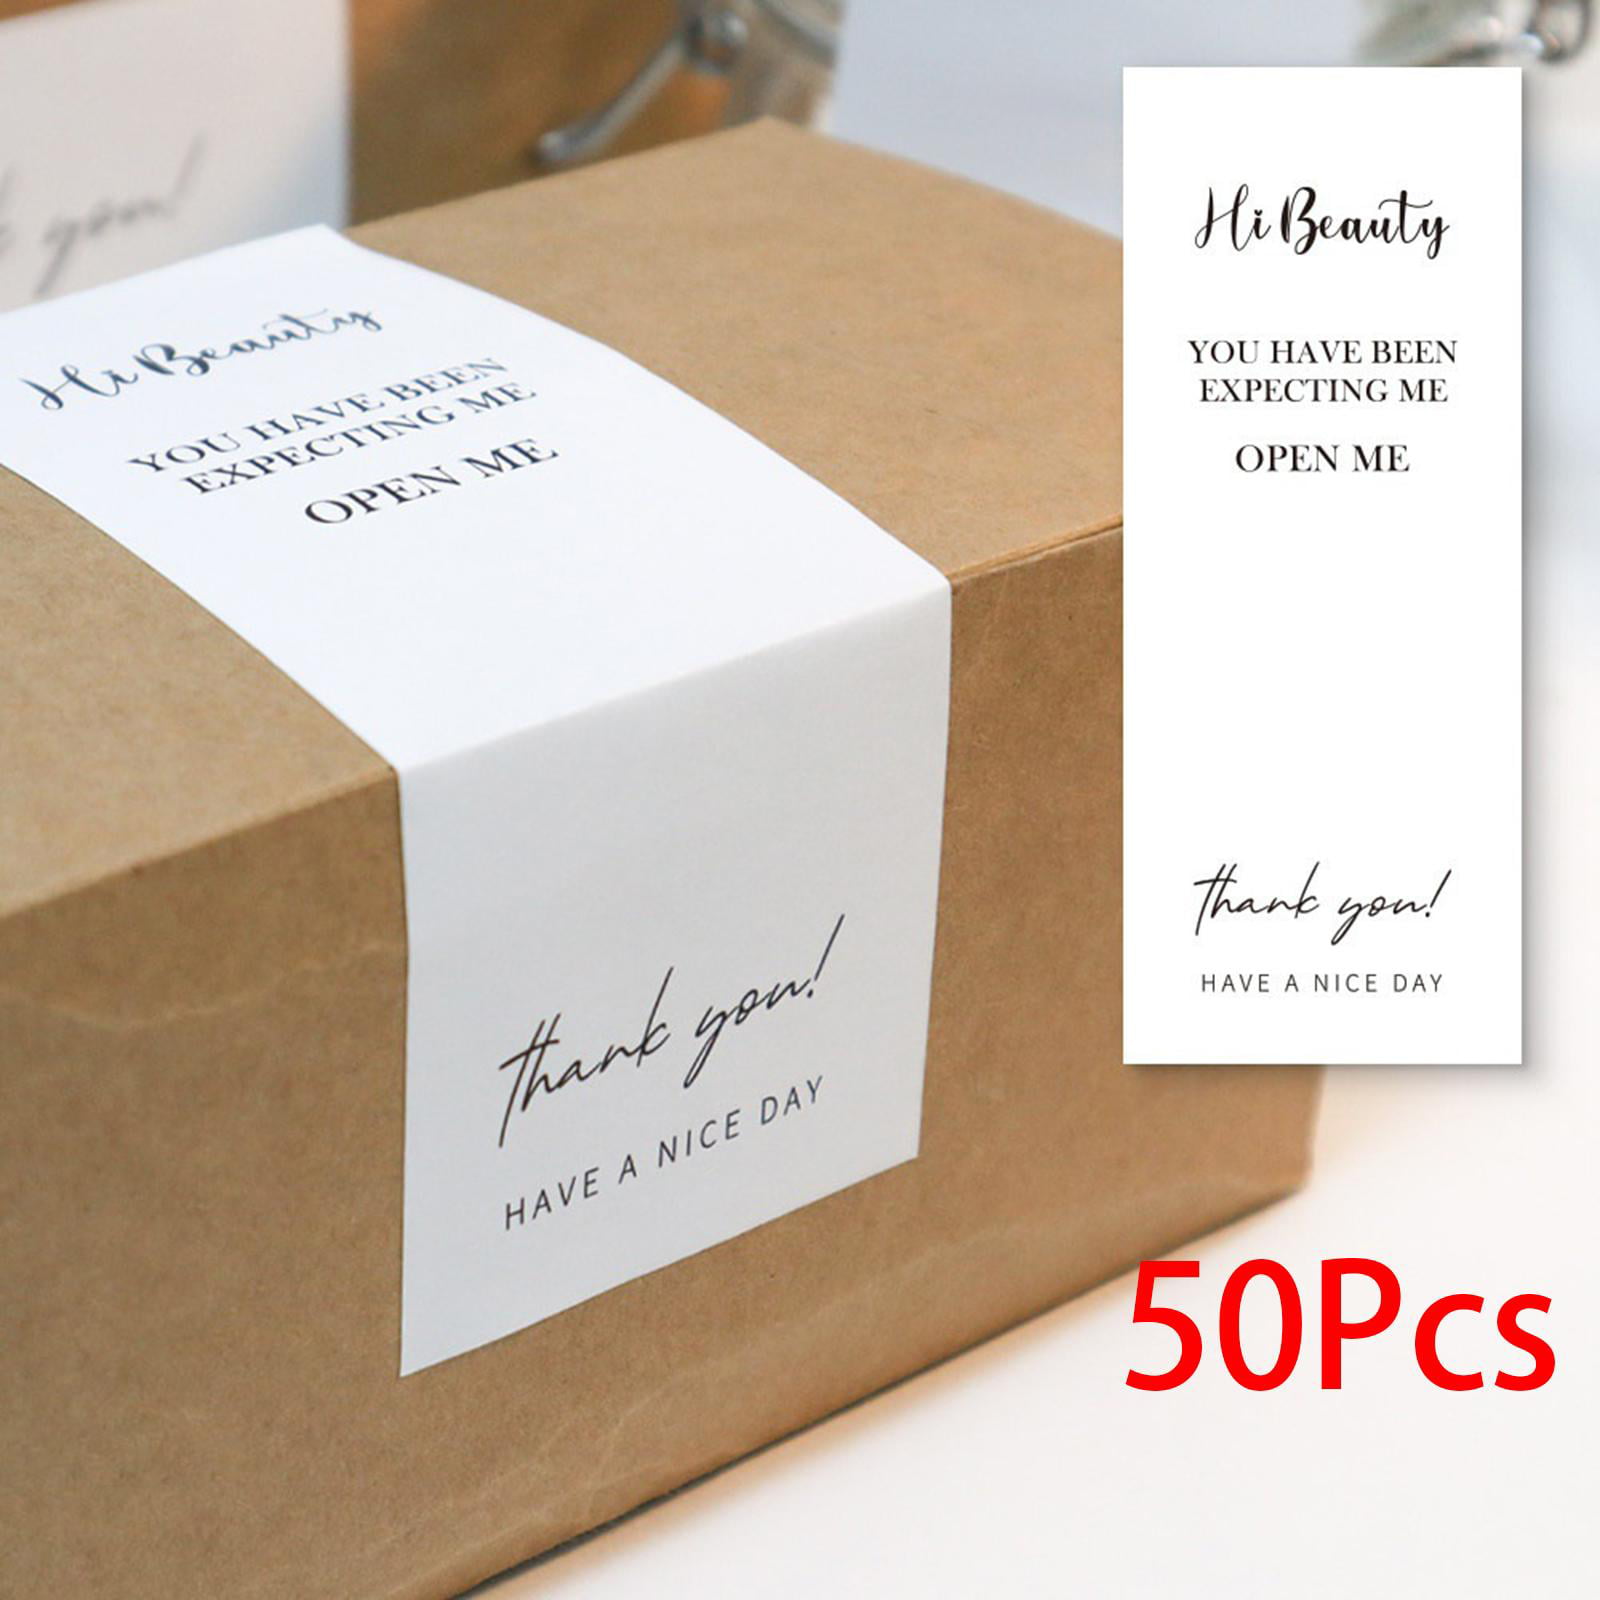 240 PCS Thank Shopping This Season Gift Box Stickers,Cute Small Business  Envelopes Stickers for Business Packages/Handmade Goods/Bags,Christmas  Theme